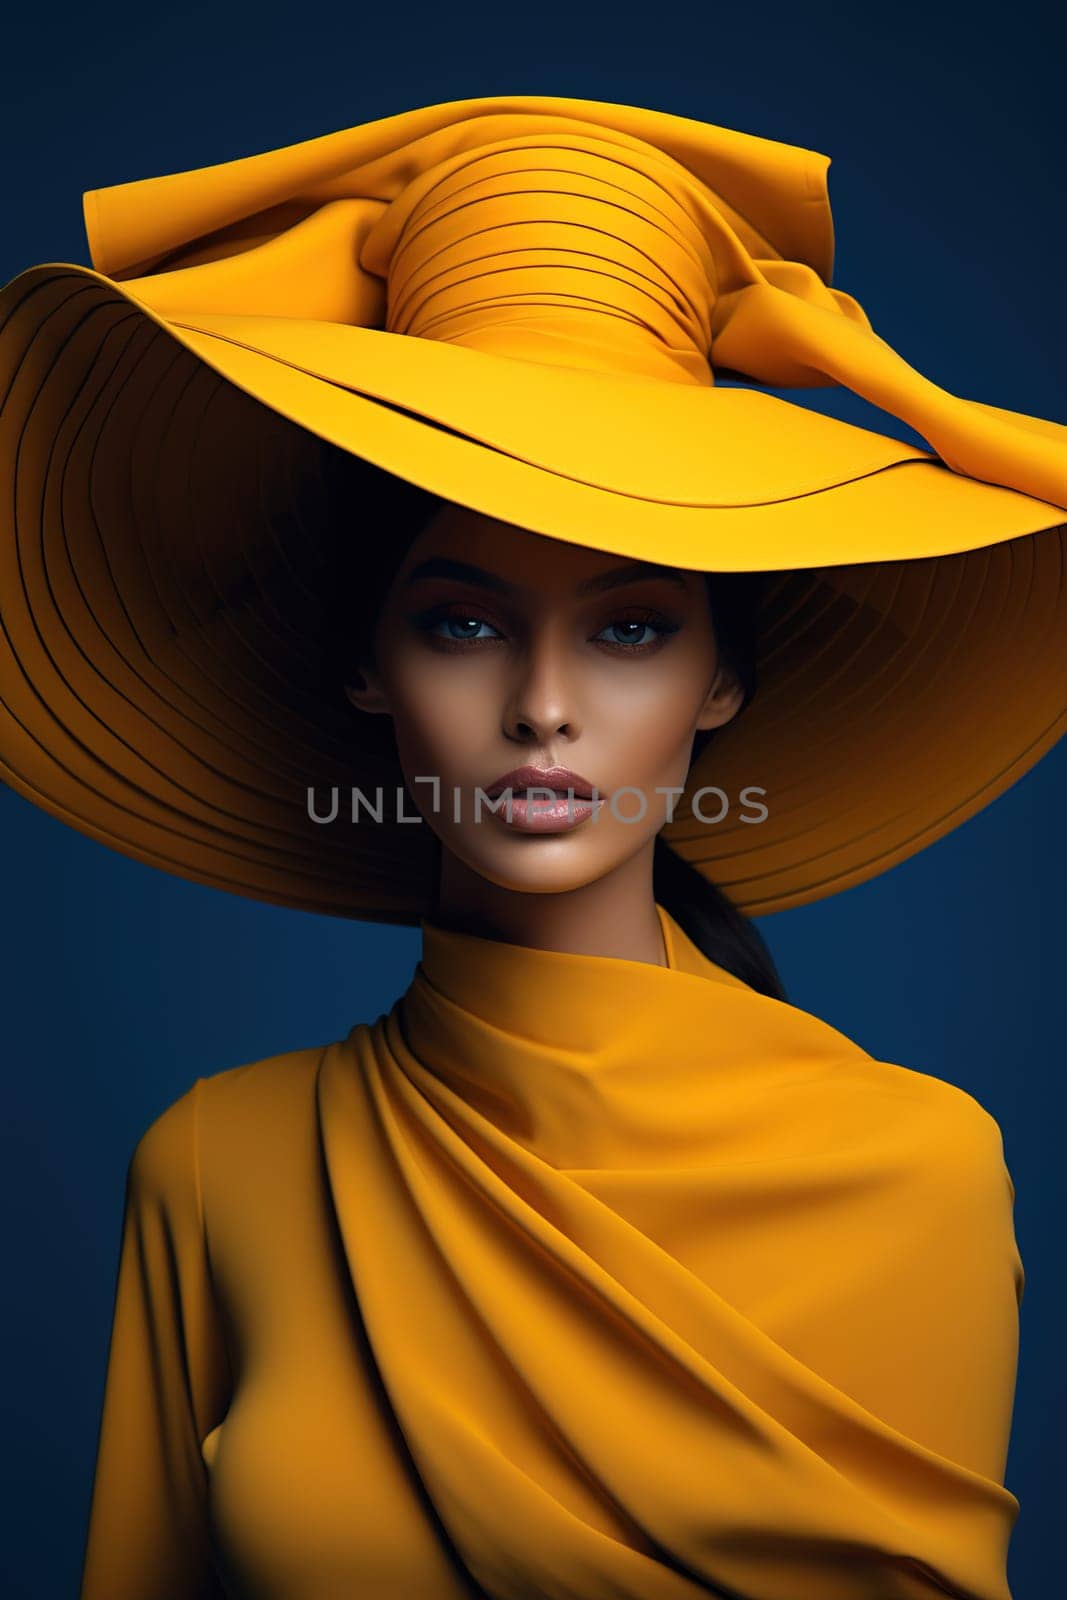 Portrait of a chic African-American woman in a stylish yellow dress and a huge yellow hat. High quality photo